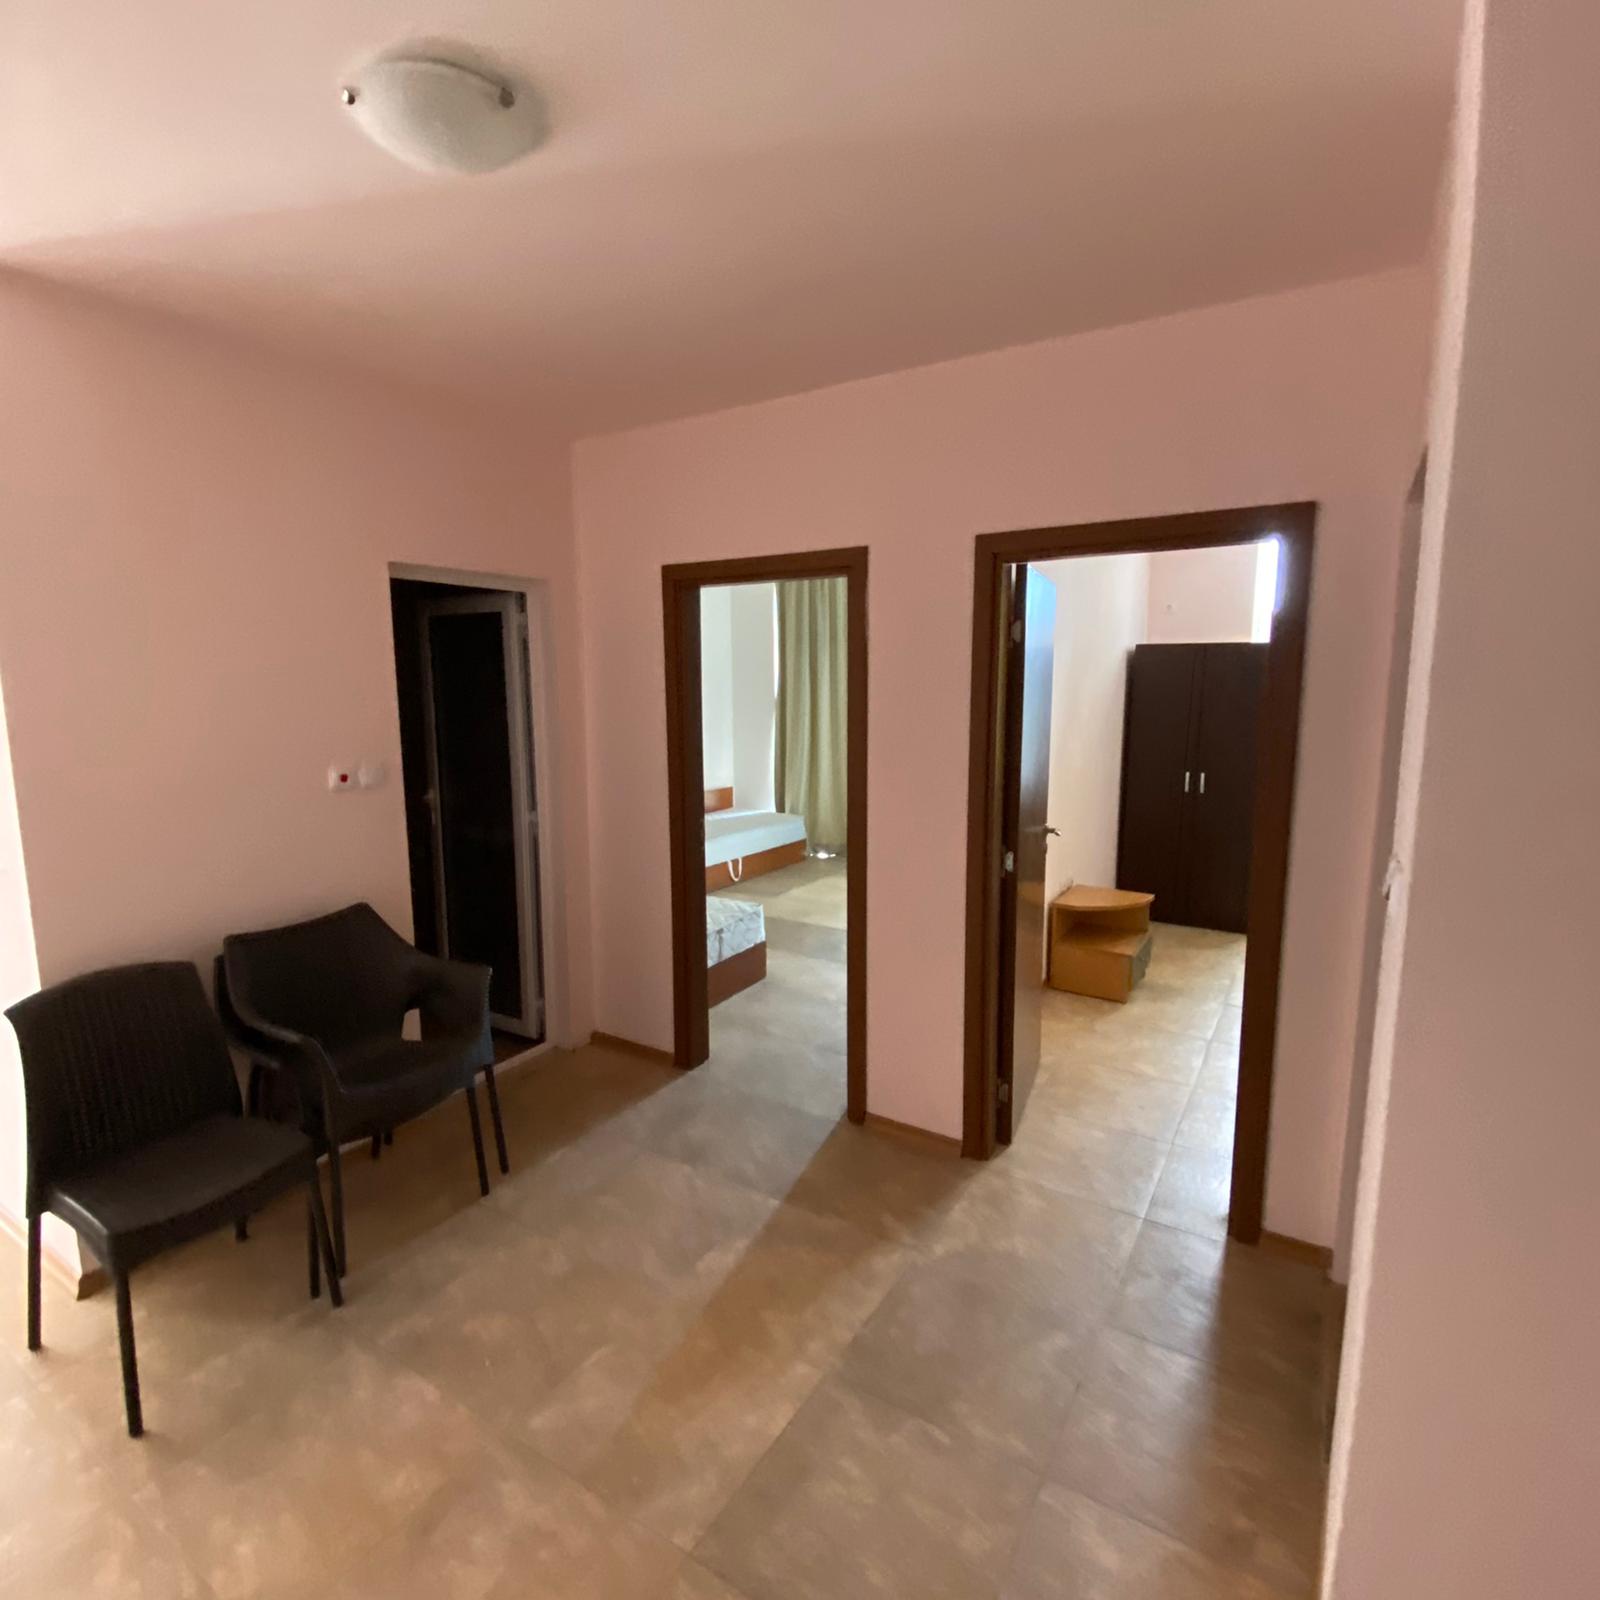 For Sale: Spacious two bedroom apartment in Sunny Beach